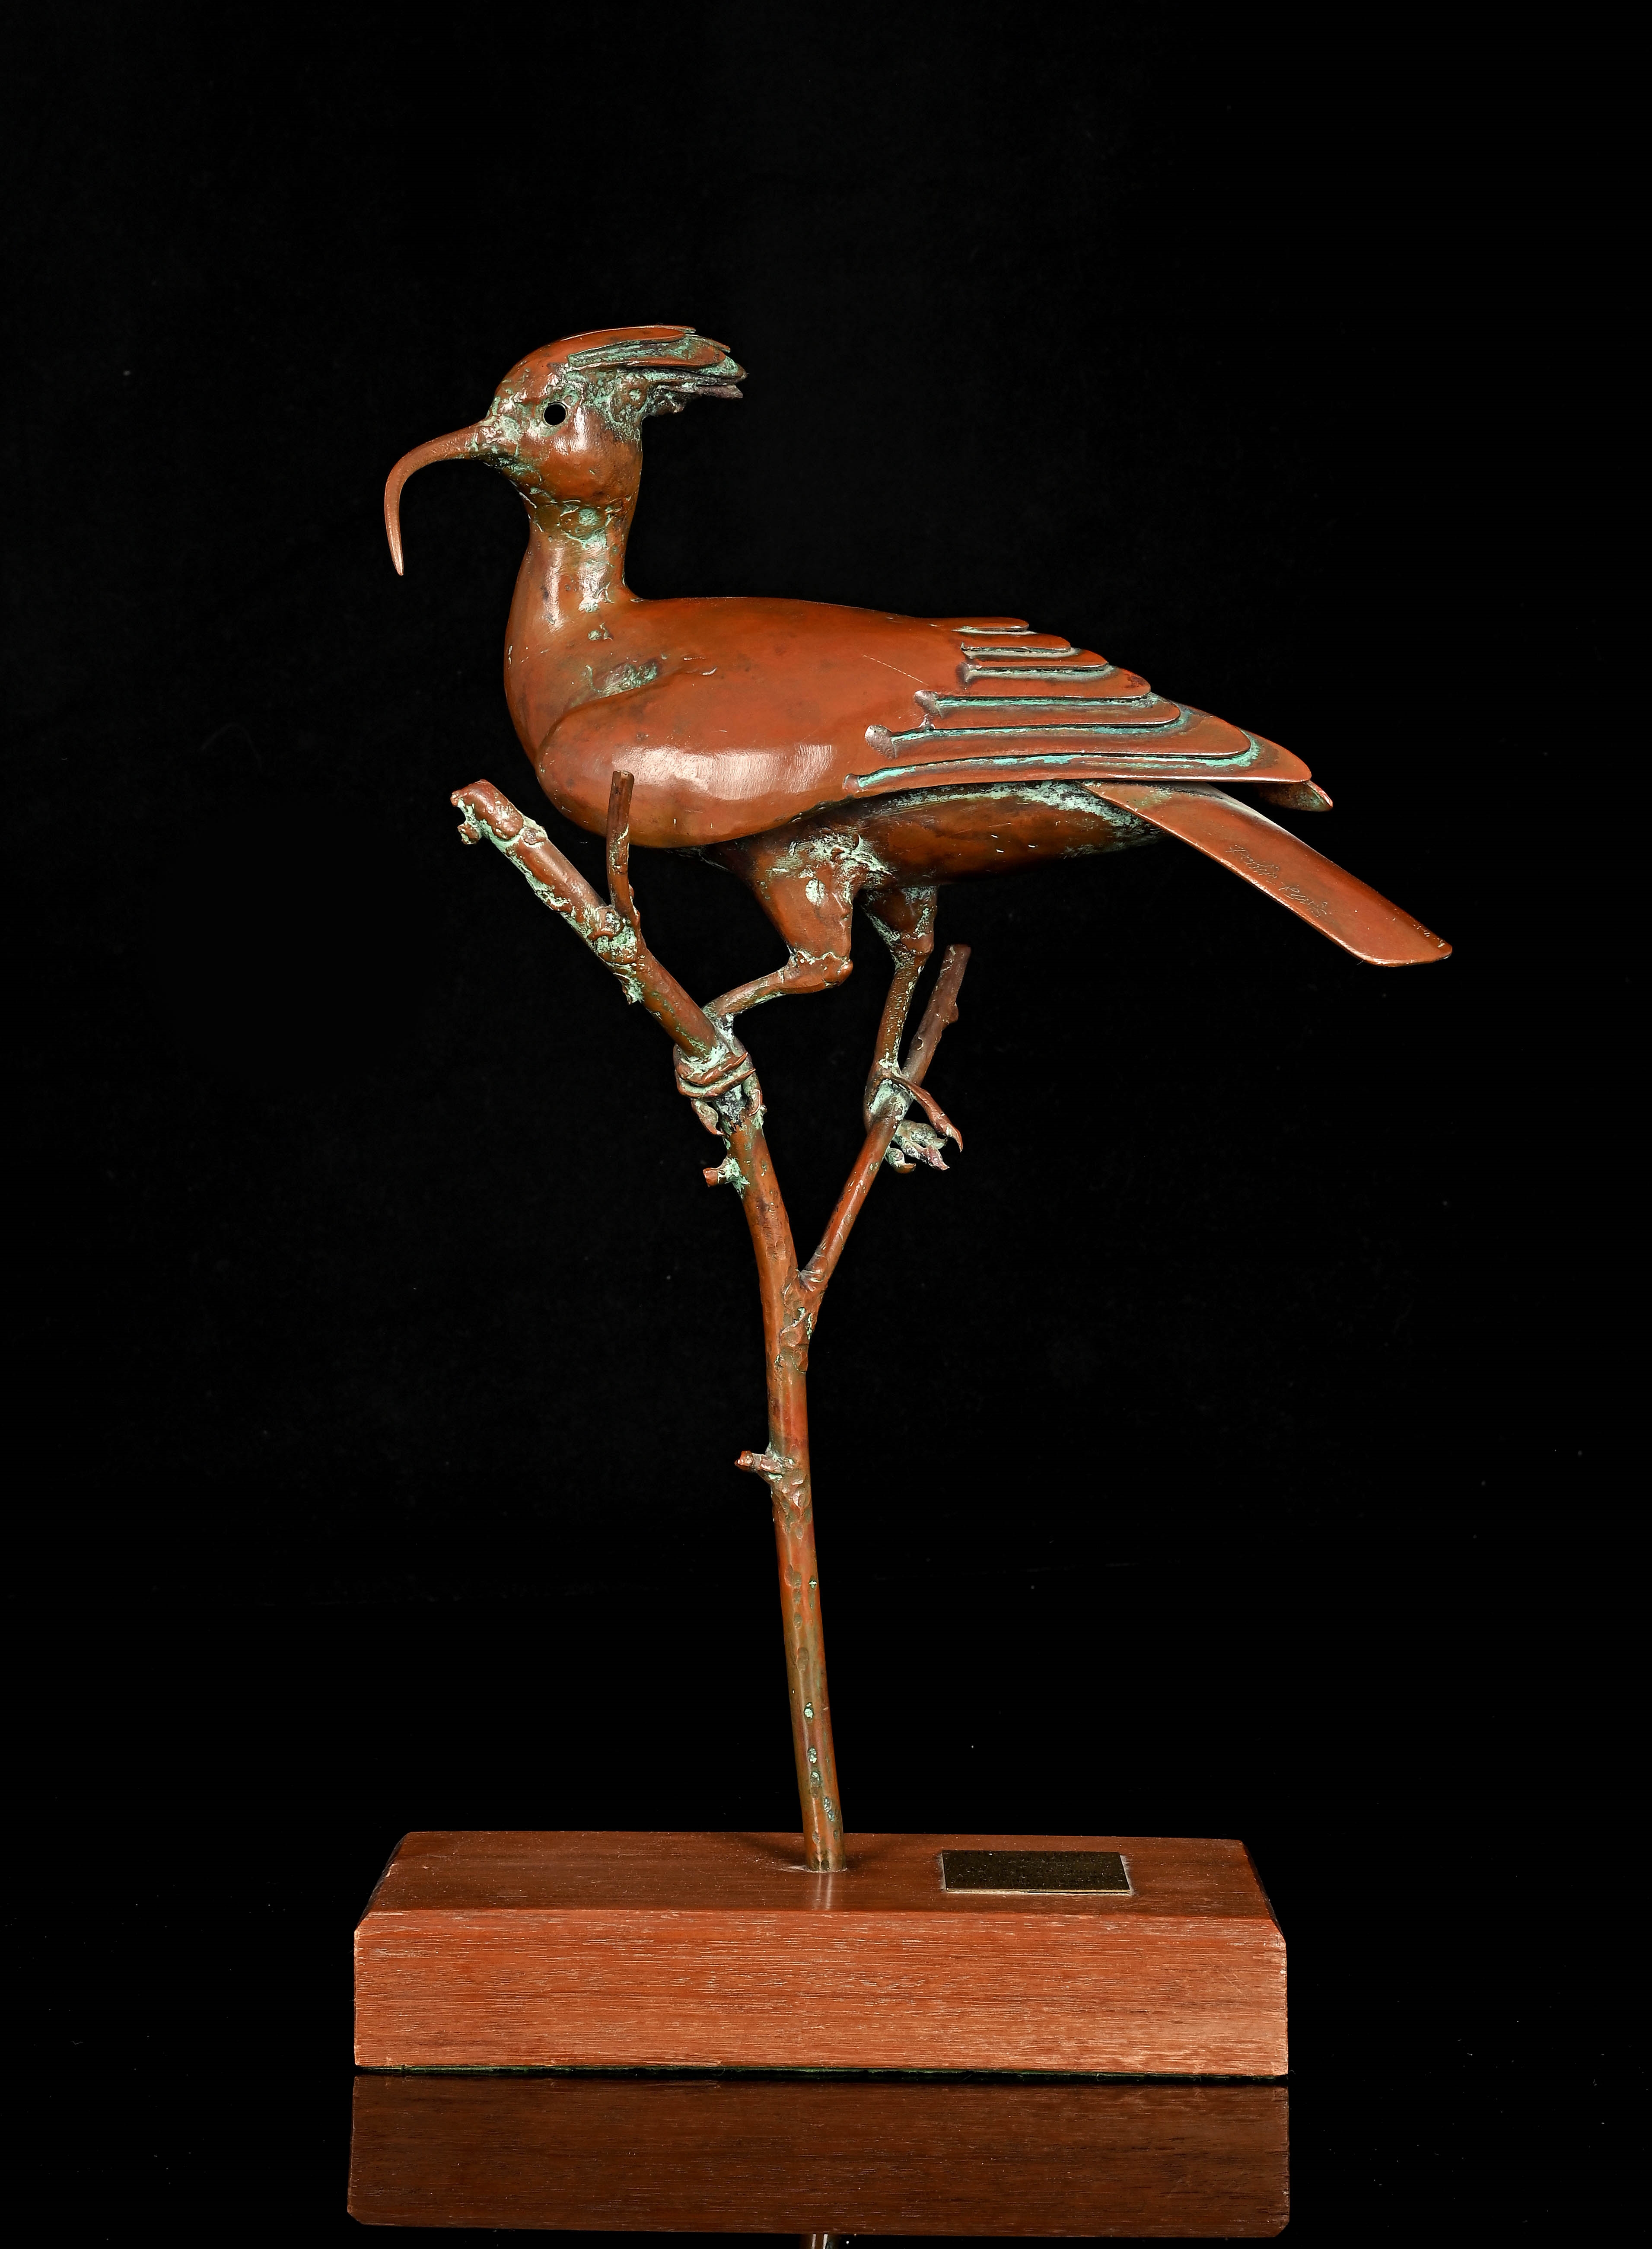 Artwork by Robin Kenneth Lewis, Africa Hoepoe, Made of bronze